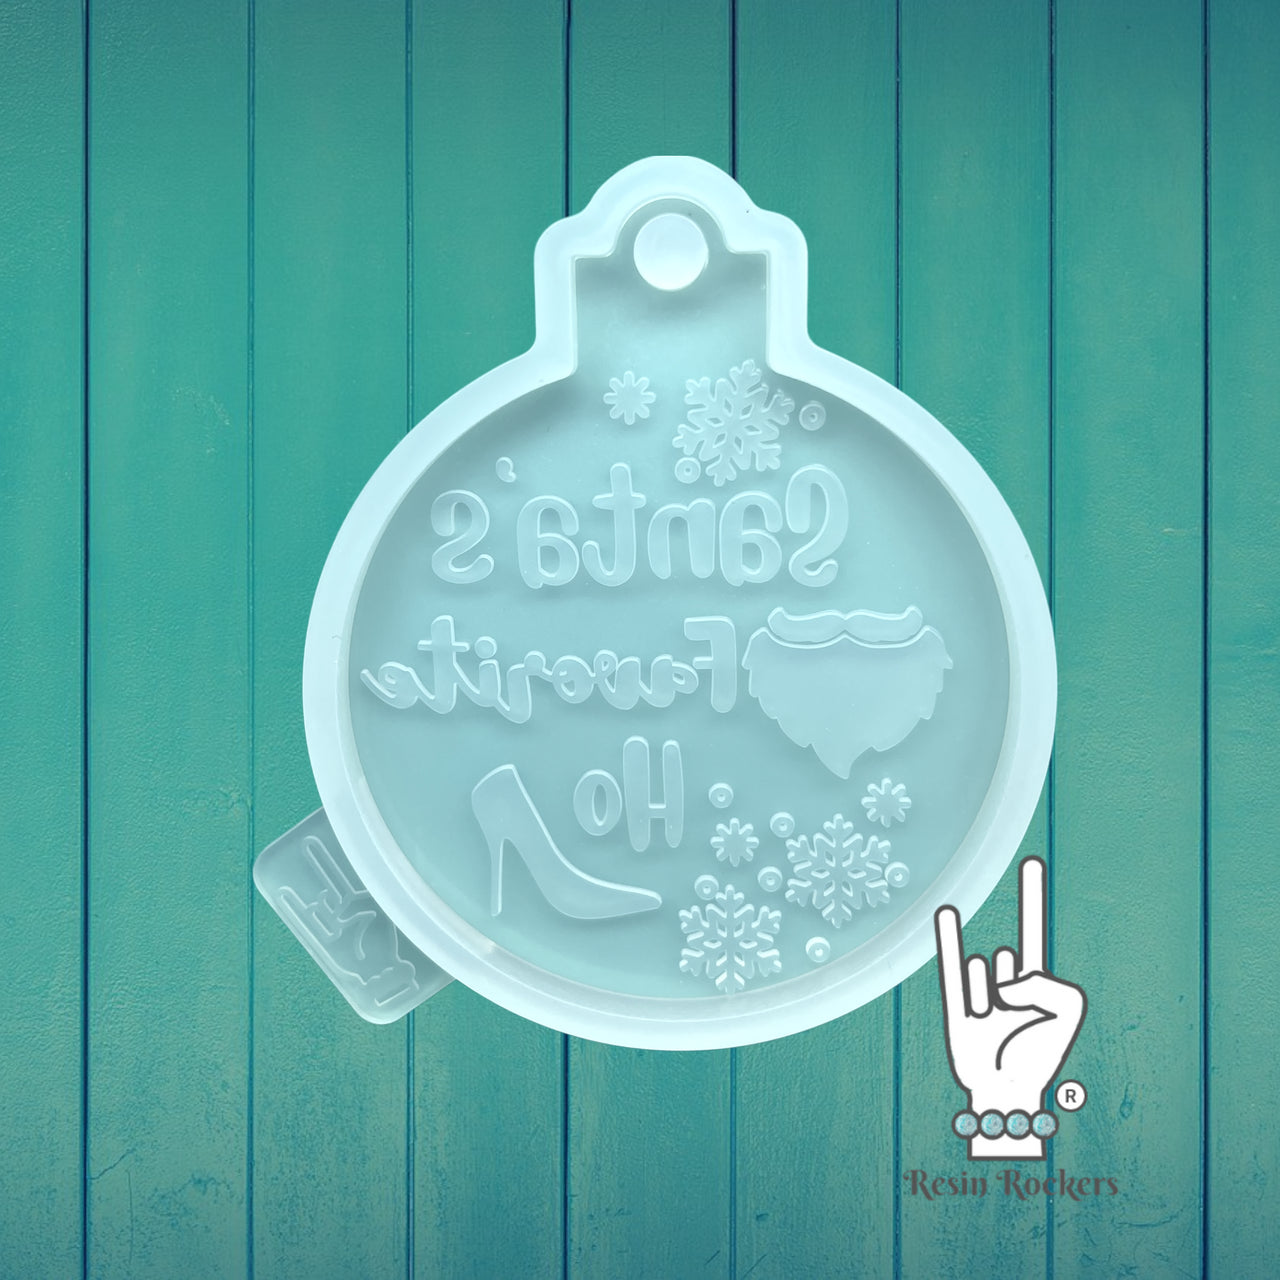 UV Safe Santas'a Favorite Ho Resin Rockers Exclusive Ornament Mold for UV and Epoxy Resin Art